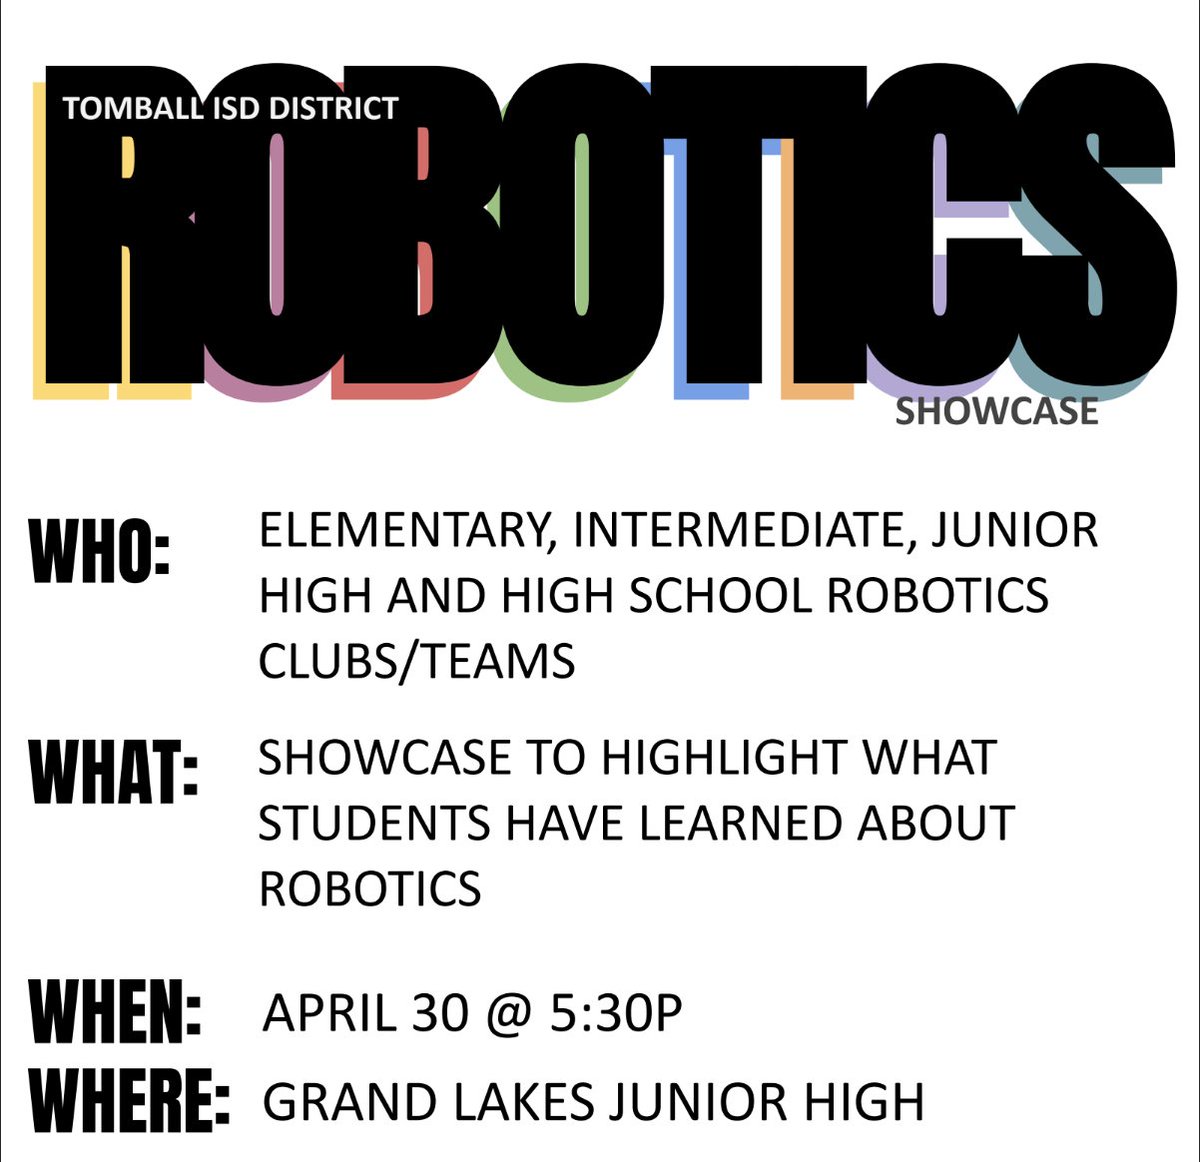 Come witness innovation at its best at our annual Robotics Showcase. #DestinationExcellence A district-wide showcase, highlighting the work of our robotics students. Don't miss out. See you Tuesday, April 30 at 5:30 PM at Grand Lakes Junior High.